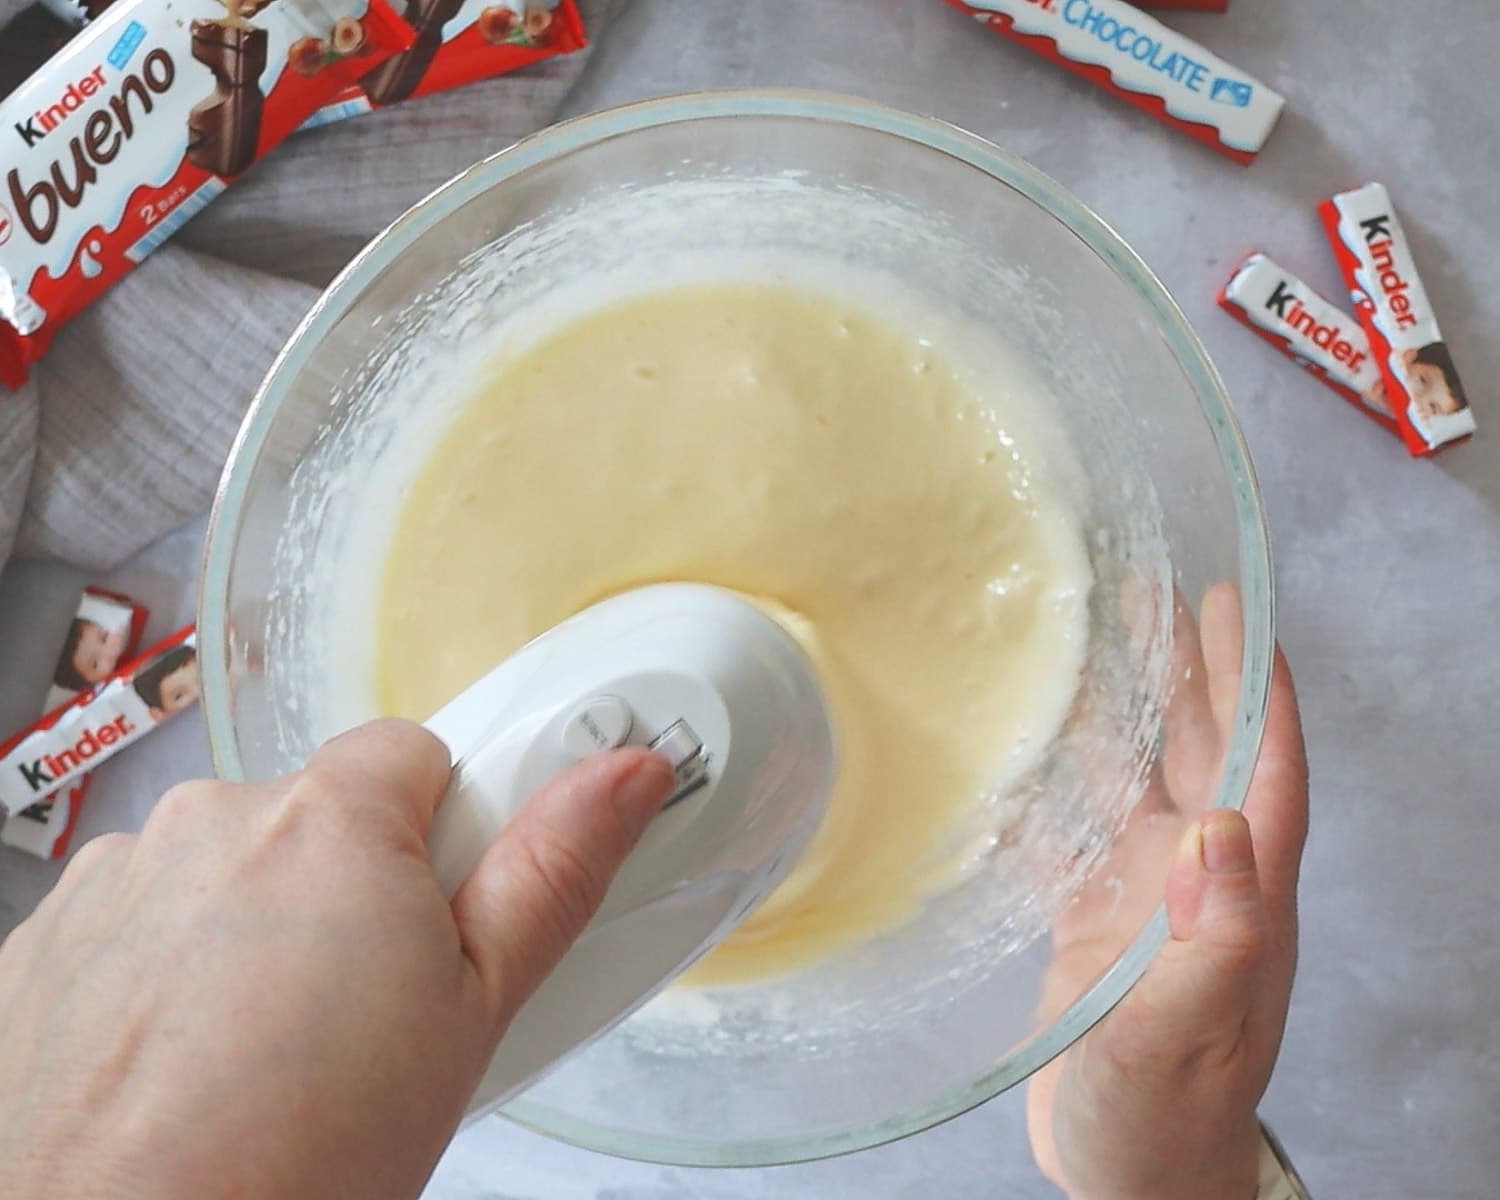 Whisking eggs with a handheld mixer